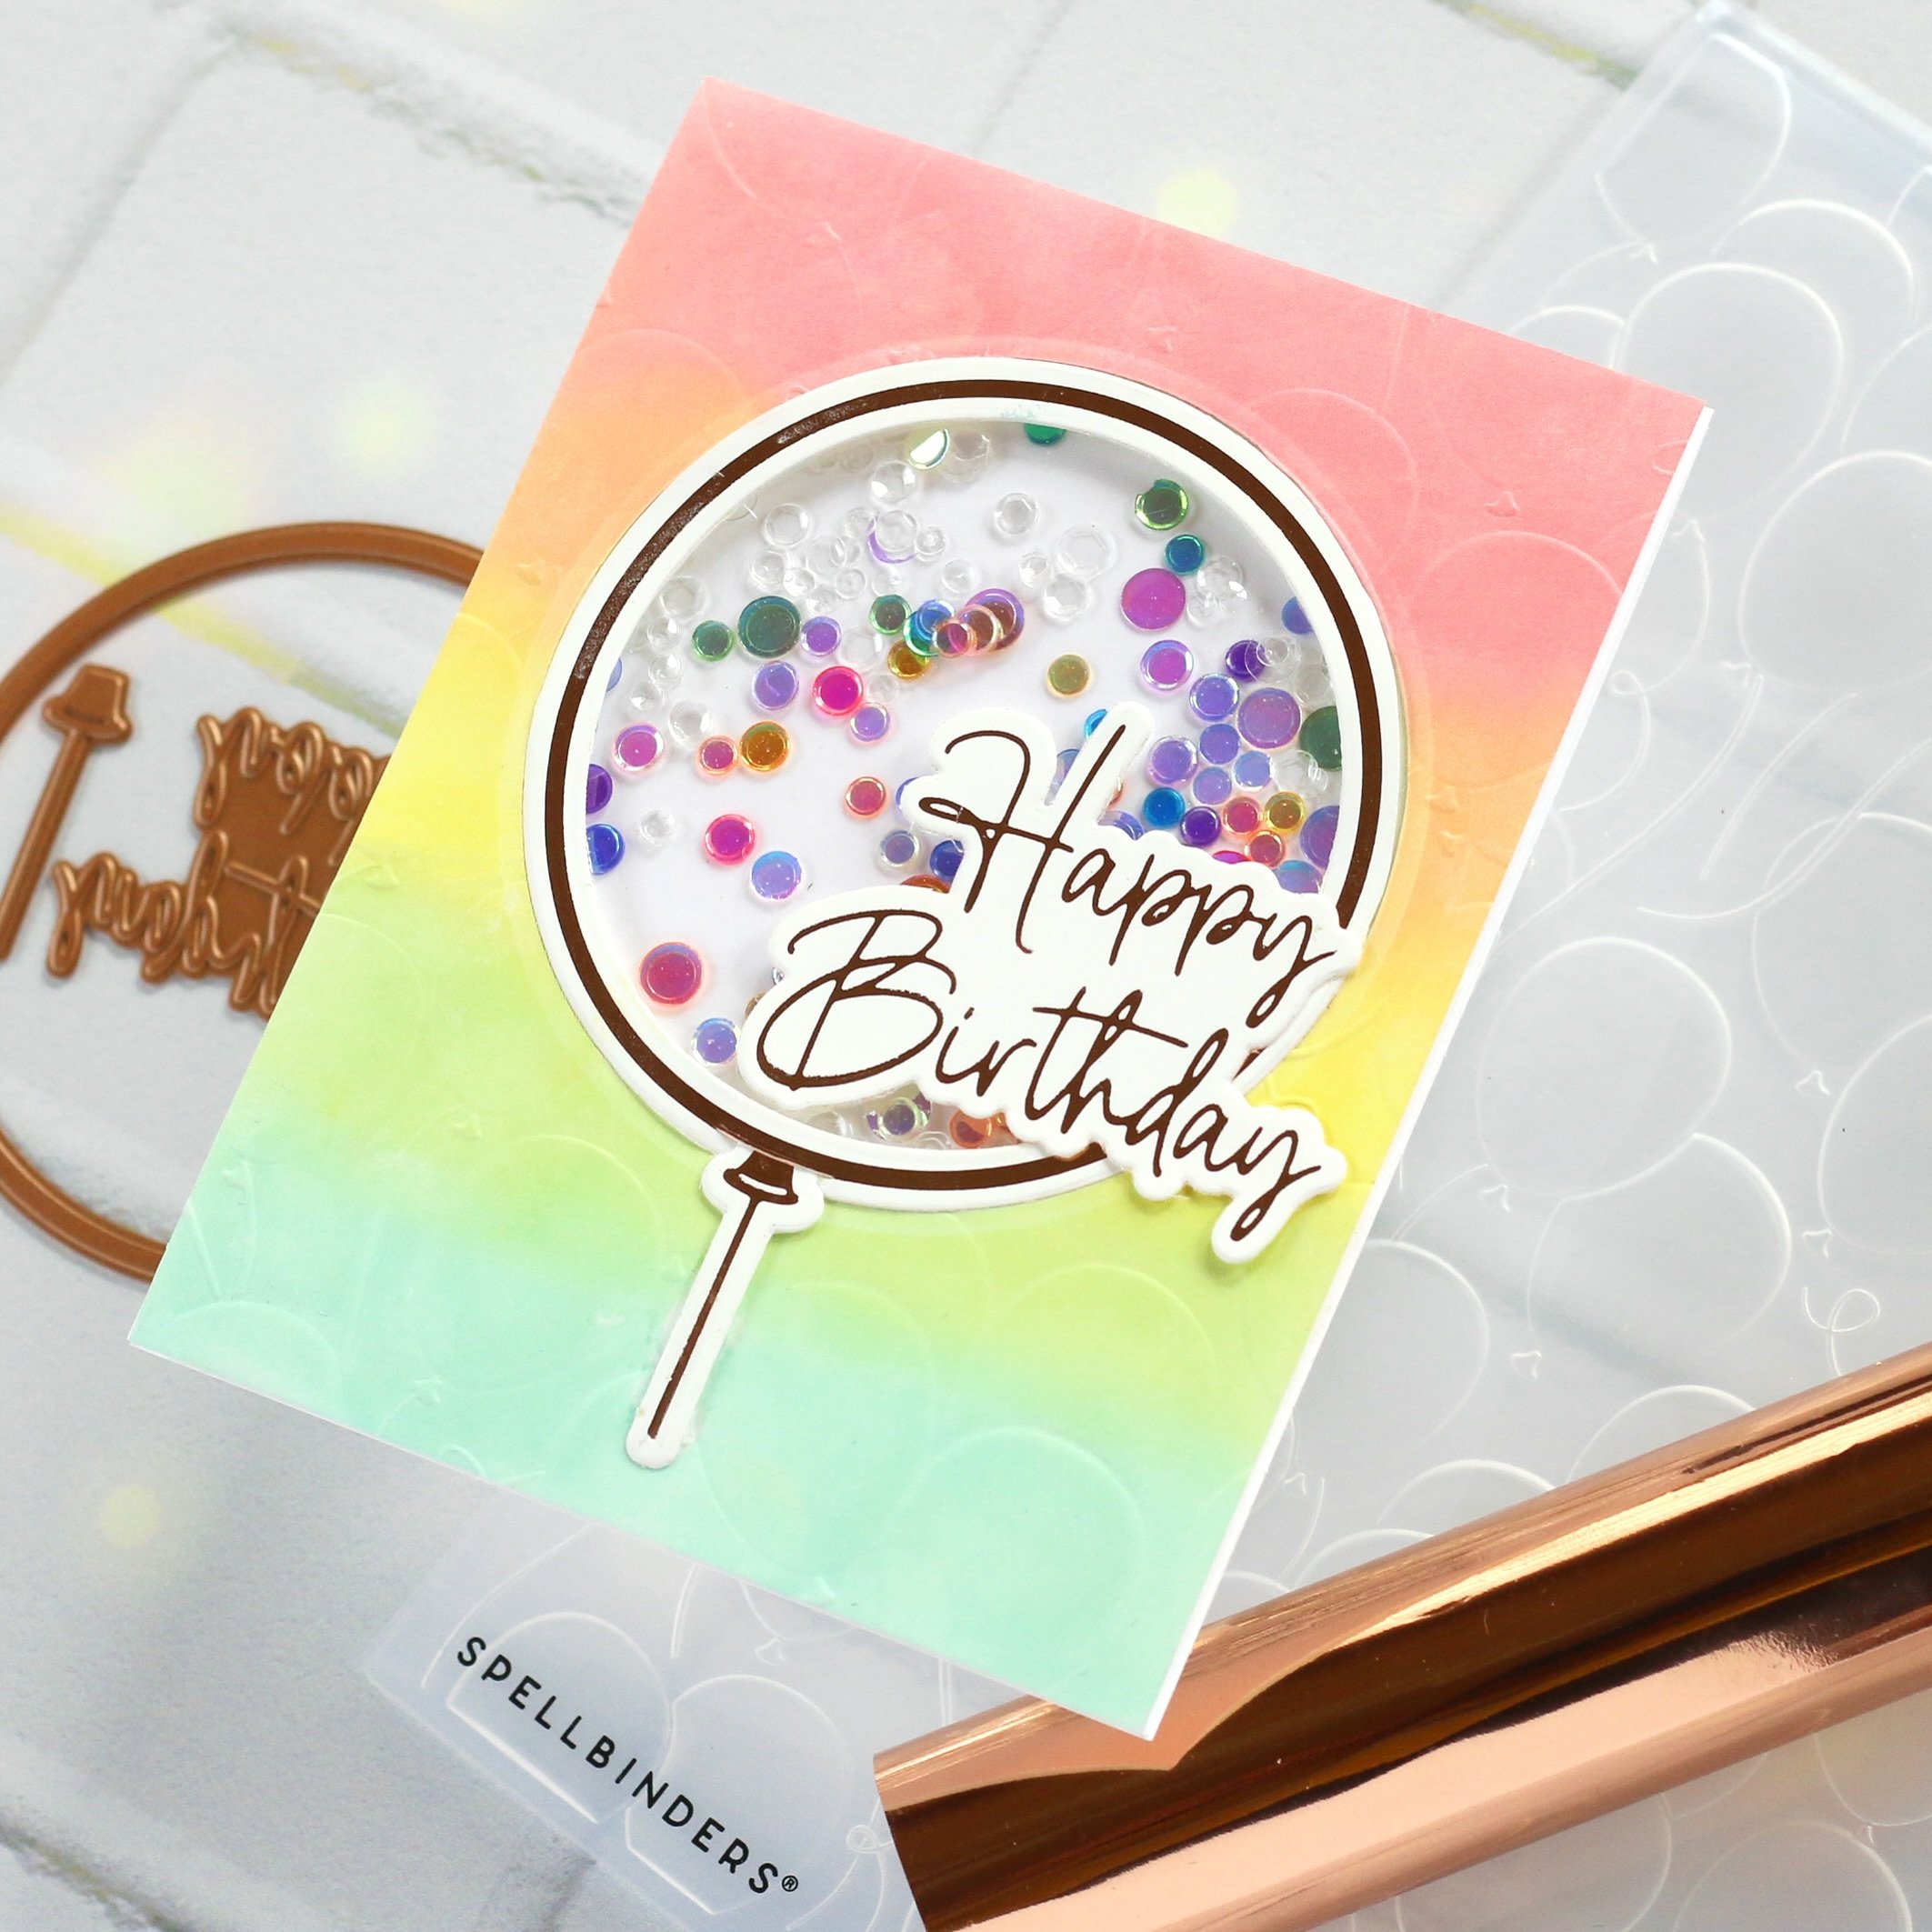 Join me LIVE tomorrow on YouTube and help me kick off the celebration! 🎈 
.
I&rsquo;m gearing up to start another year around the sun and I&rsquo;m making a card LIVE on YouTube to celebrate! You&rsquo;ll find a fun range of techniques to add color,